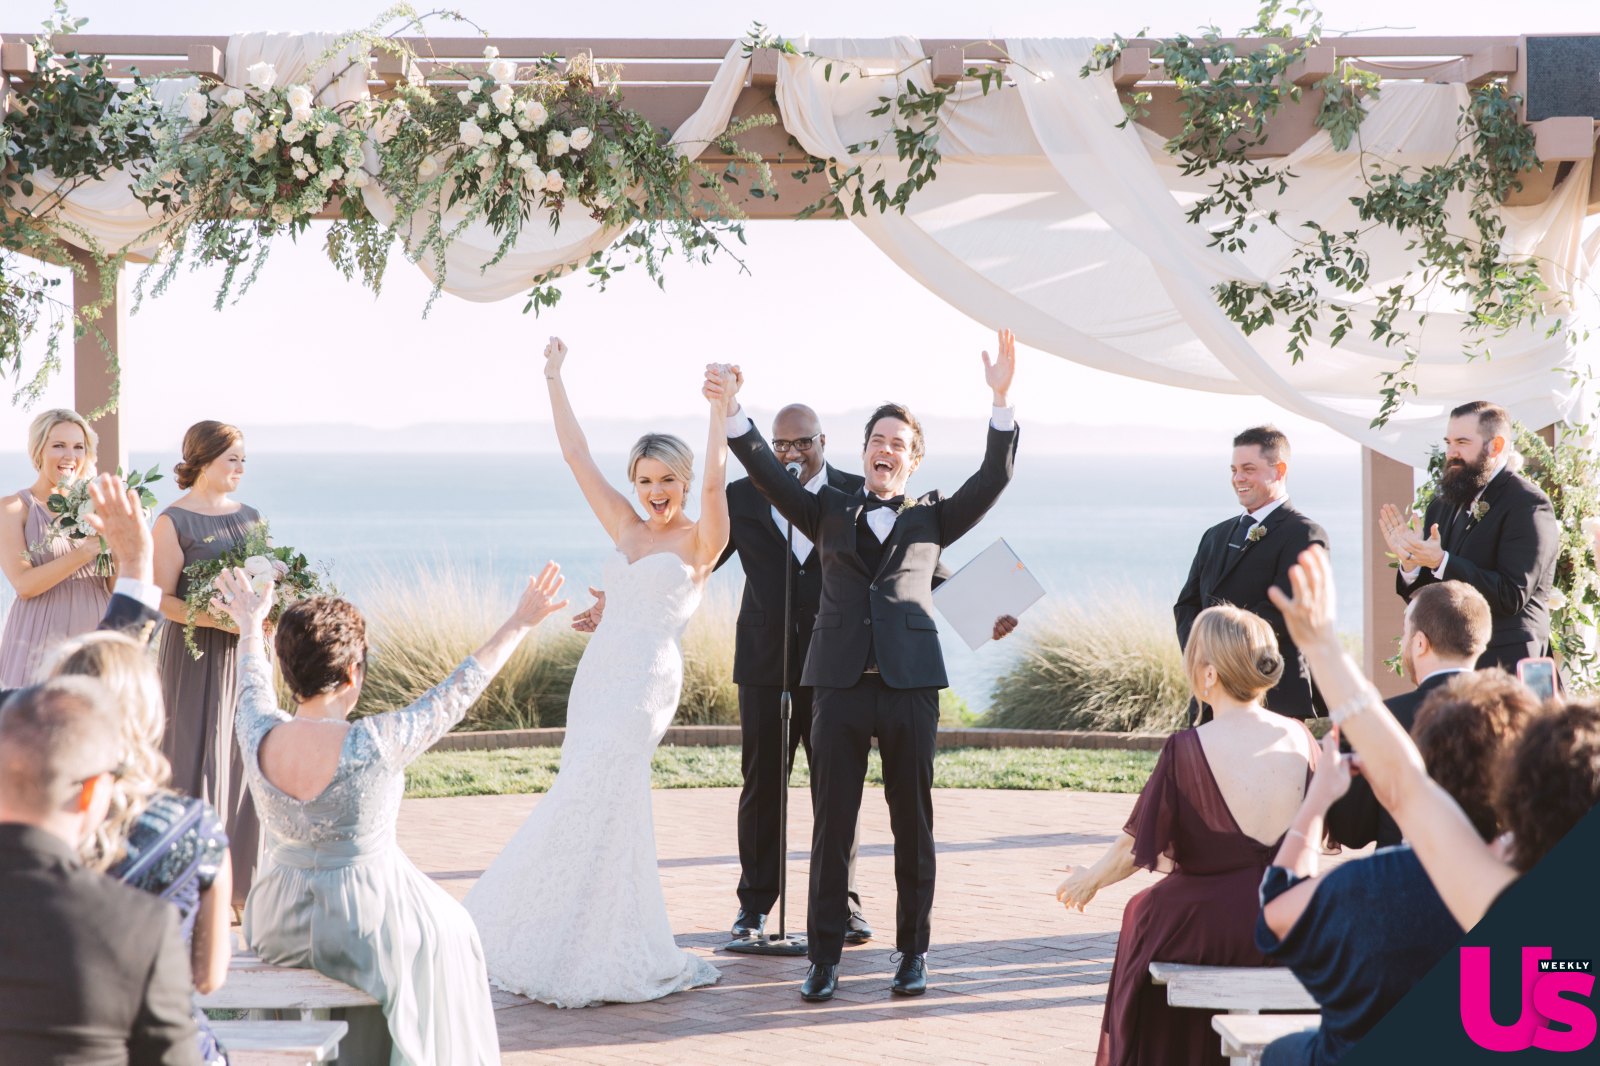 Ali Fedotowsky Marries Kevin Manno in Beachside Wedding: Photos | Us Weekly